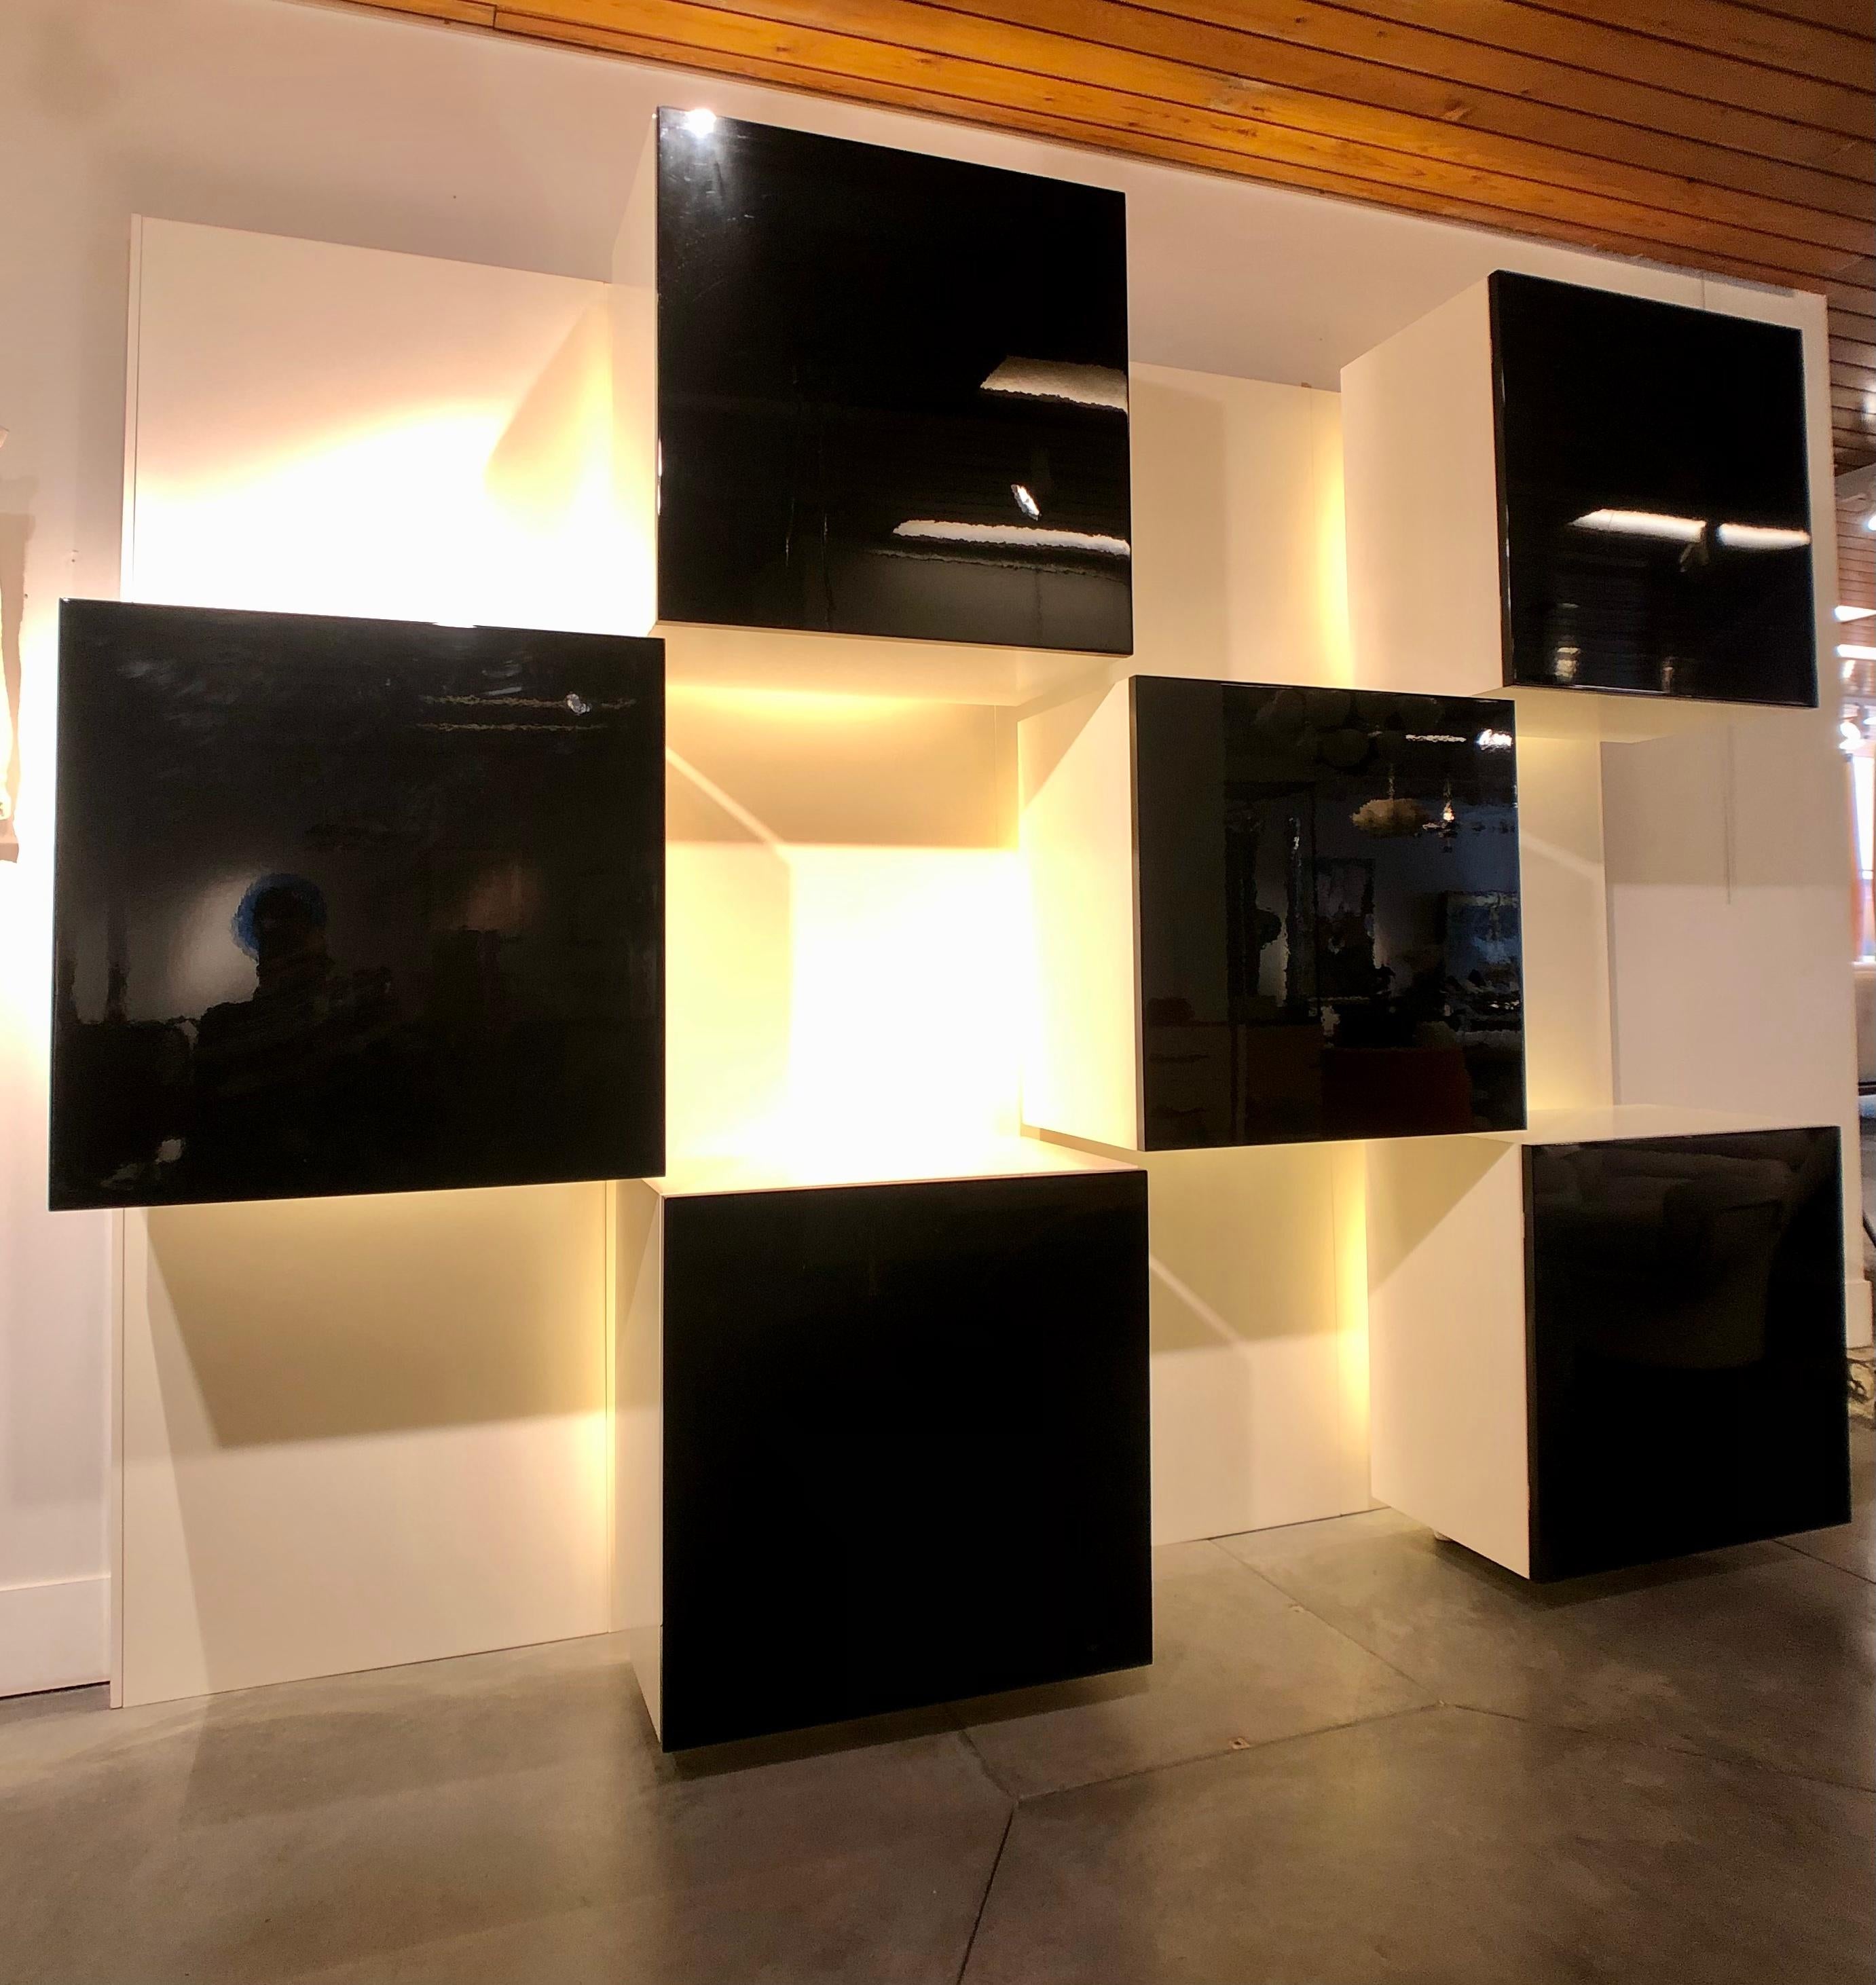 Roberto Monsani for Acerbis illuminated wall unit 
6 black boxes each one with a light and fixed on 4 white wall panels with some plexi fixtures giving an impression of floating furniture.
Good general condition a trace is visible on a black door